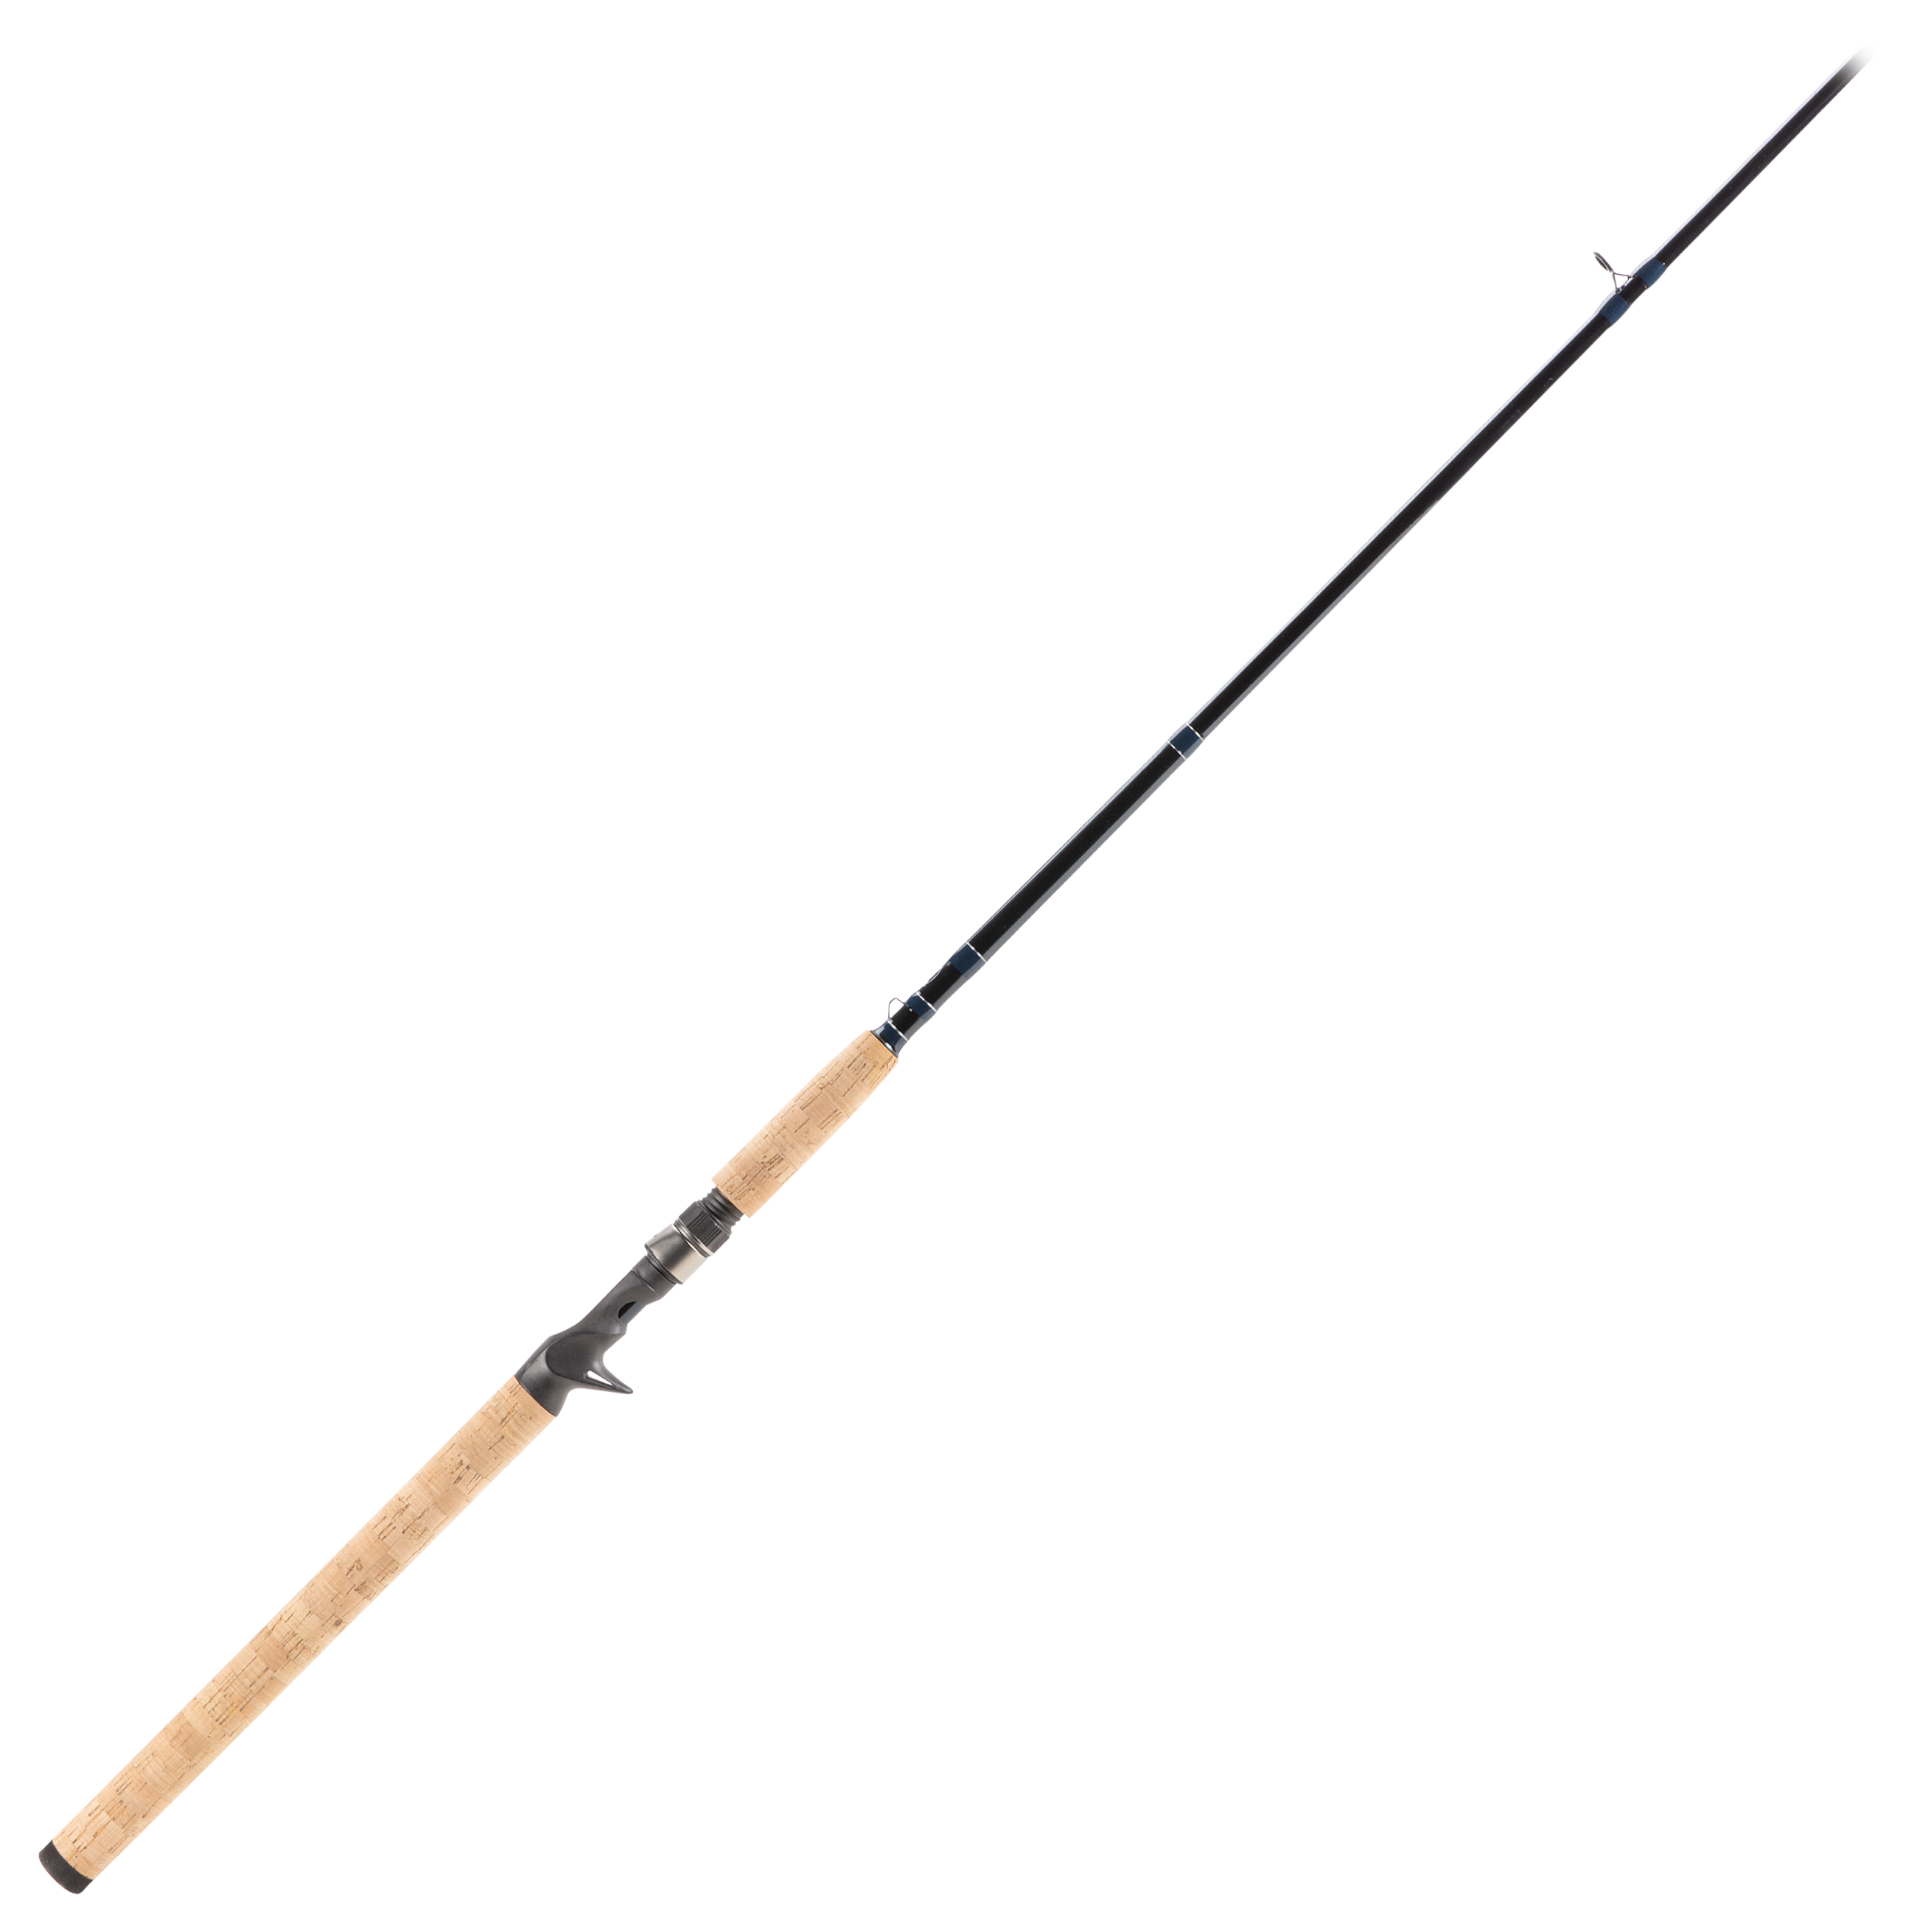 Bass Pro Shops Graphite Series Muskie Casting Rod - 7'6″ - X Heavy